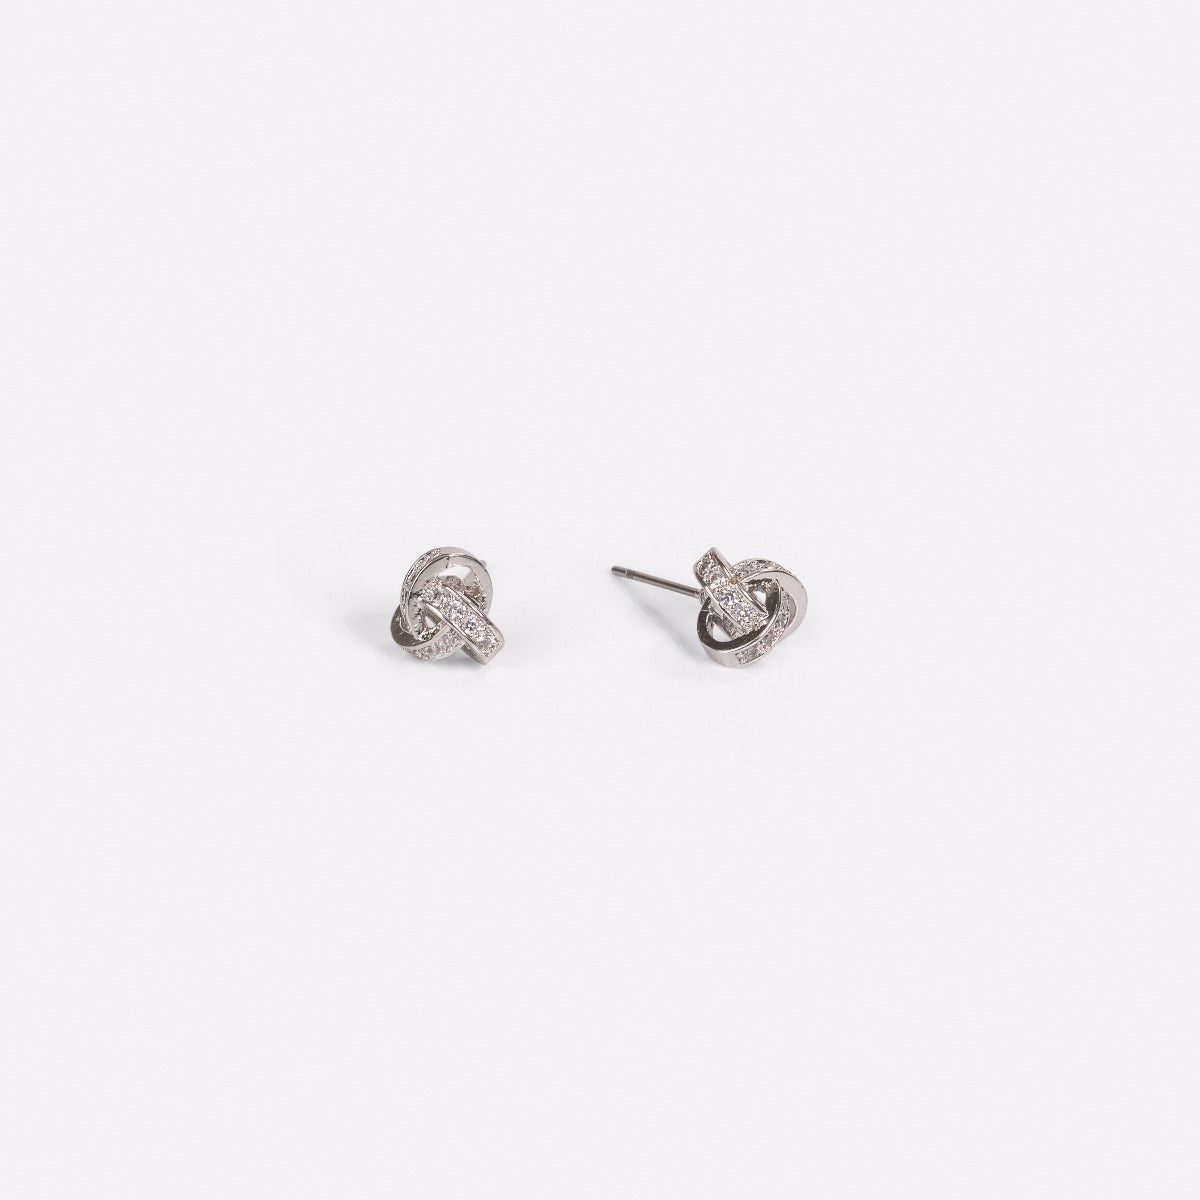 Knot earrings with cubic zirconia stones